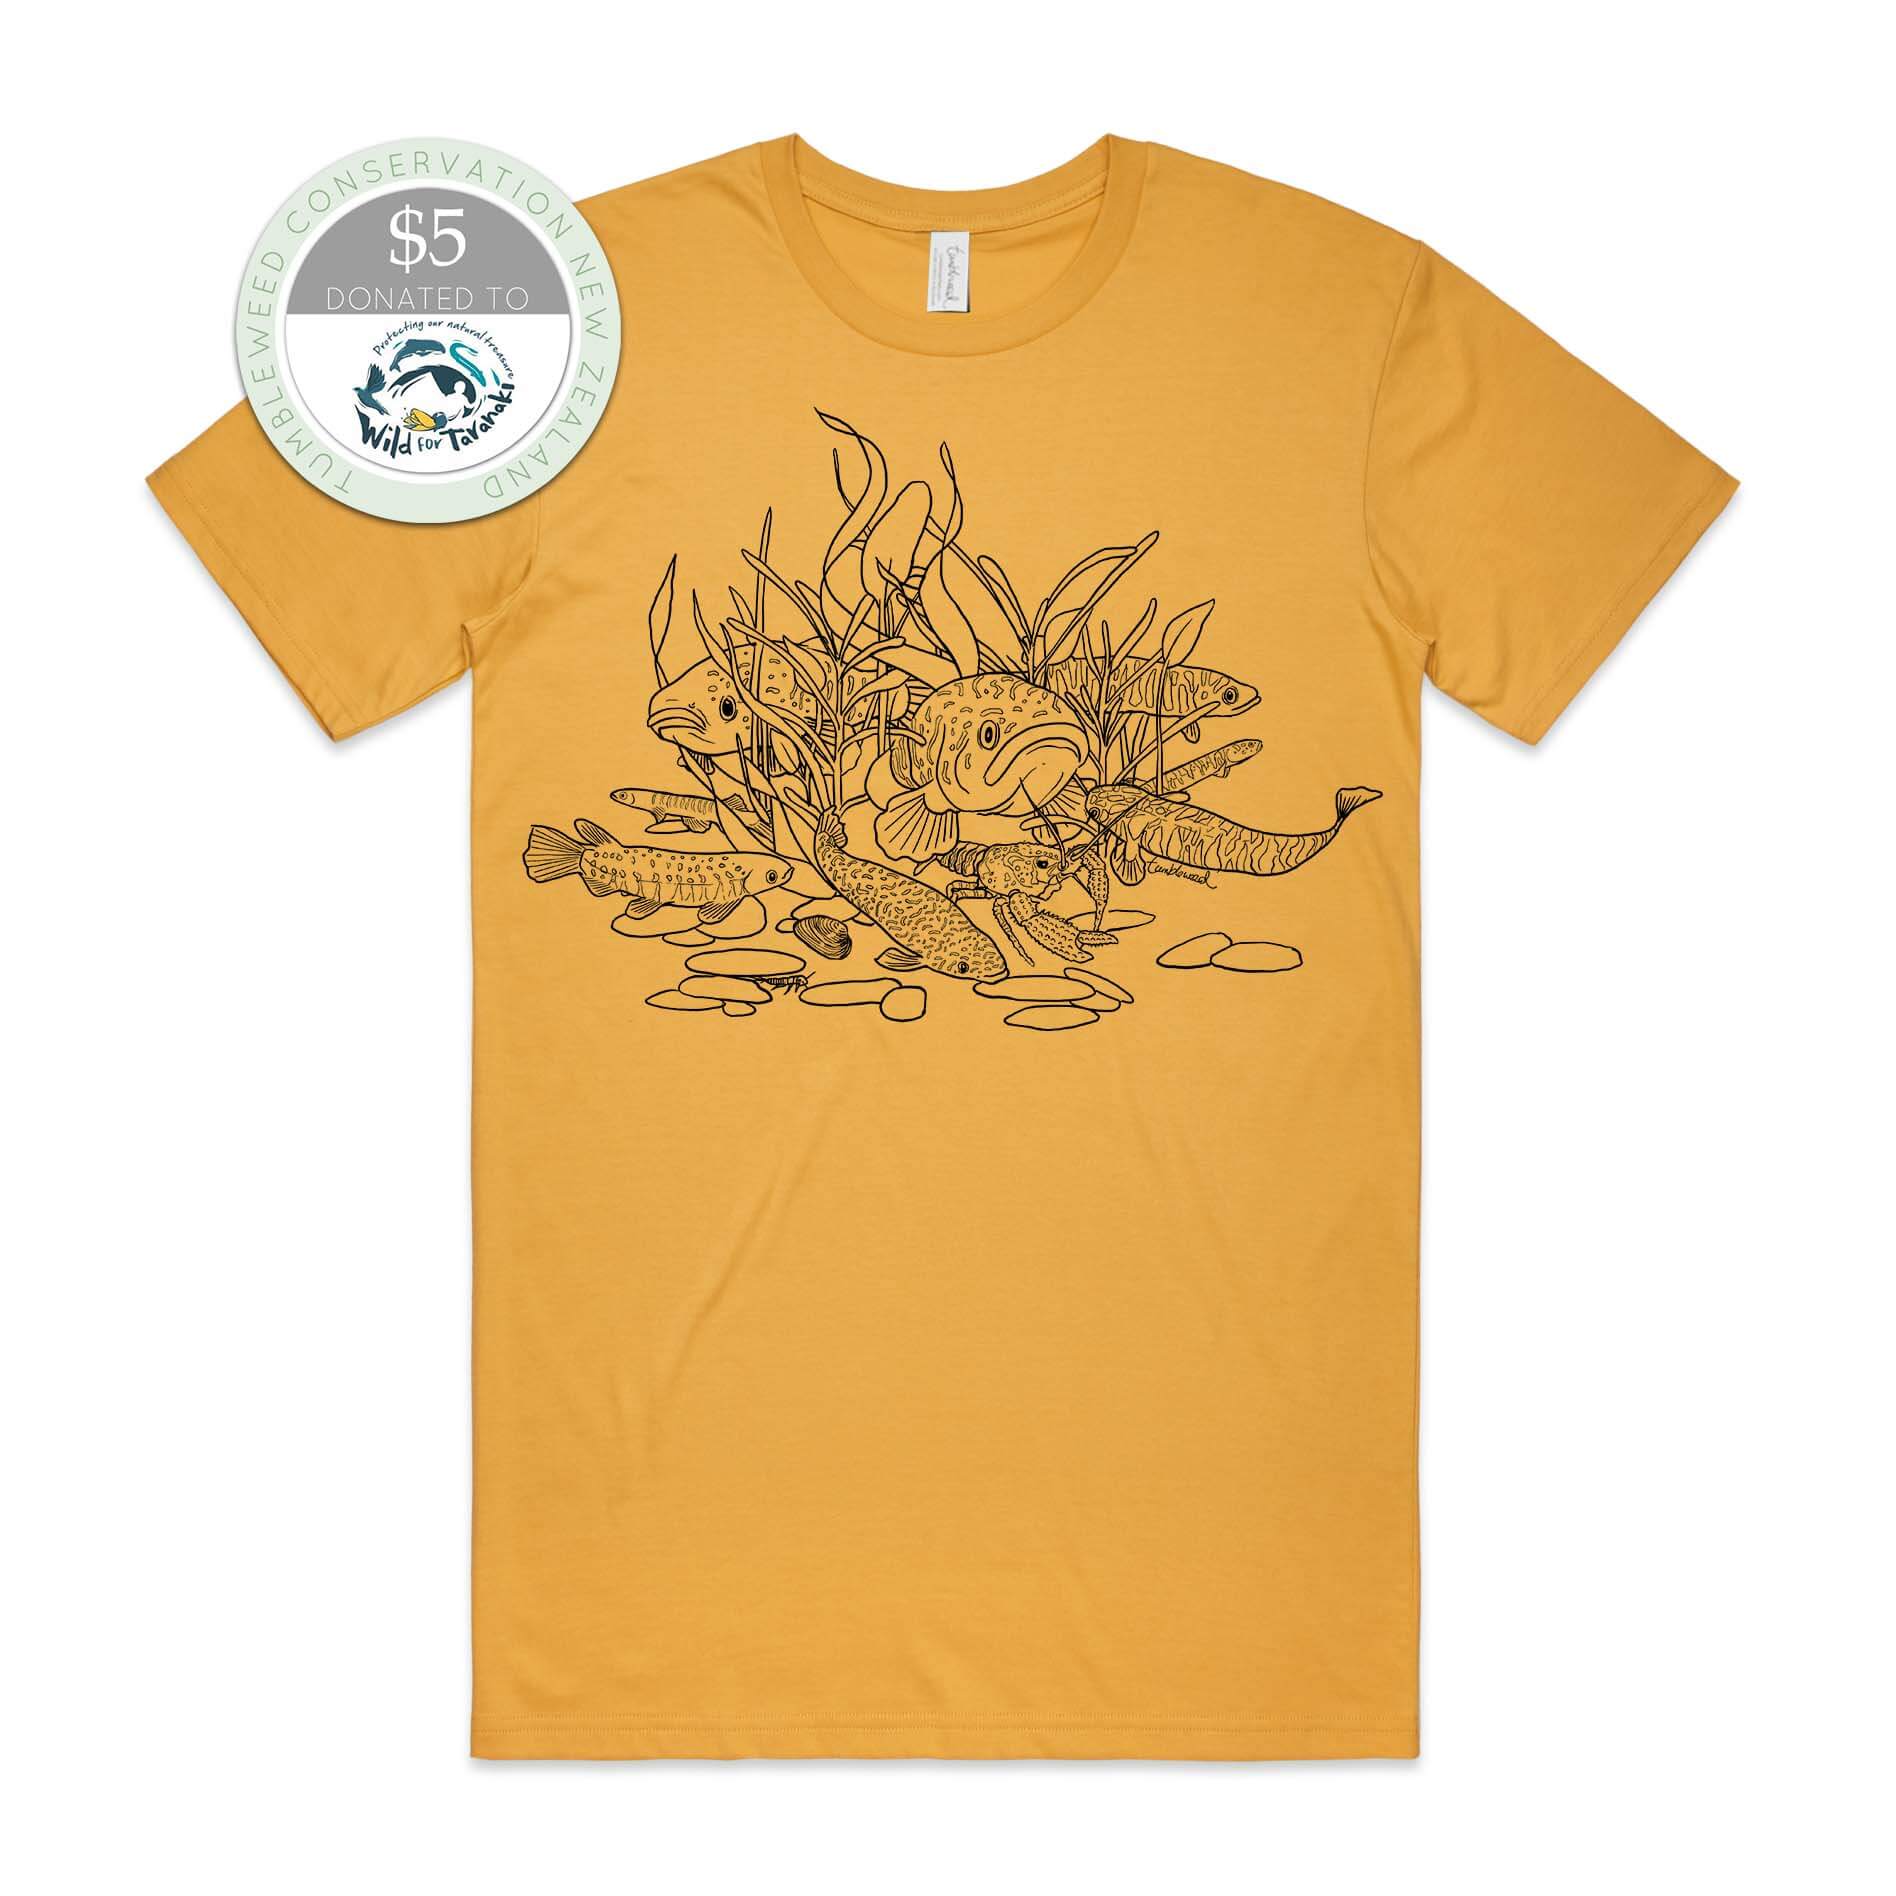 Charcoal, female t-shirt featuring a screen printed Freshwater fish design.